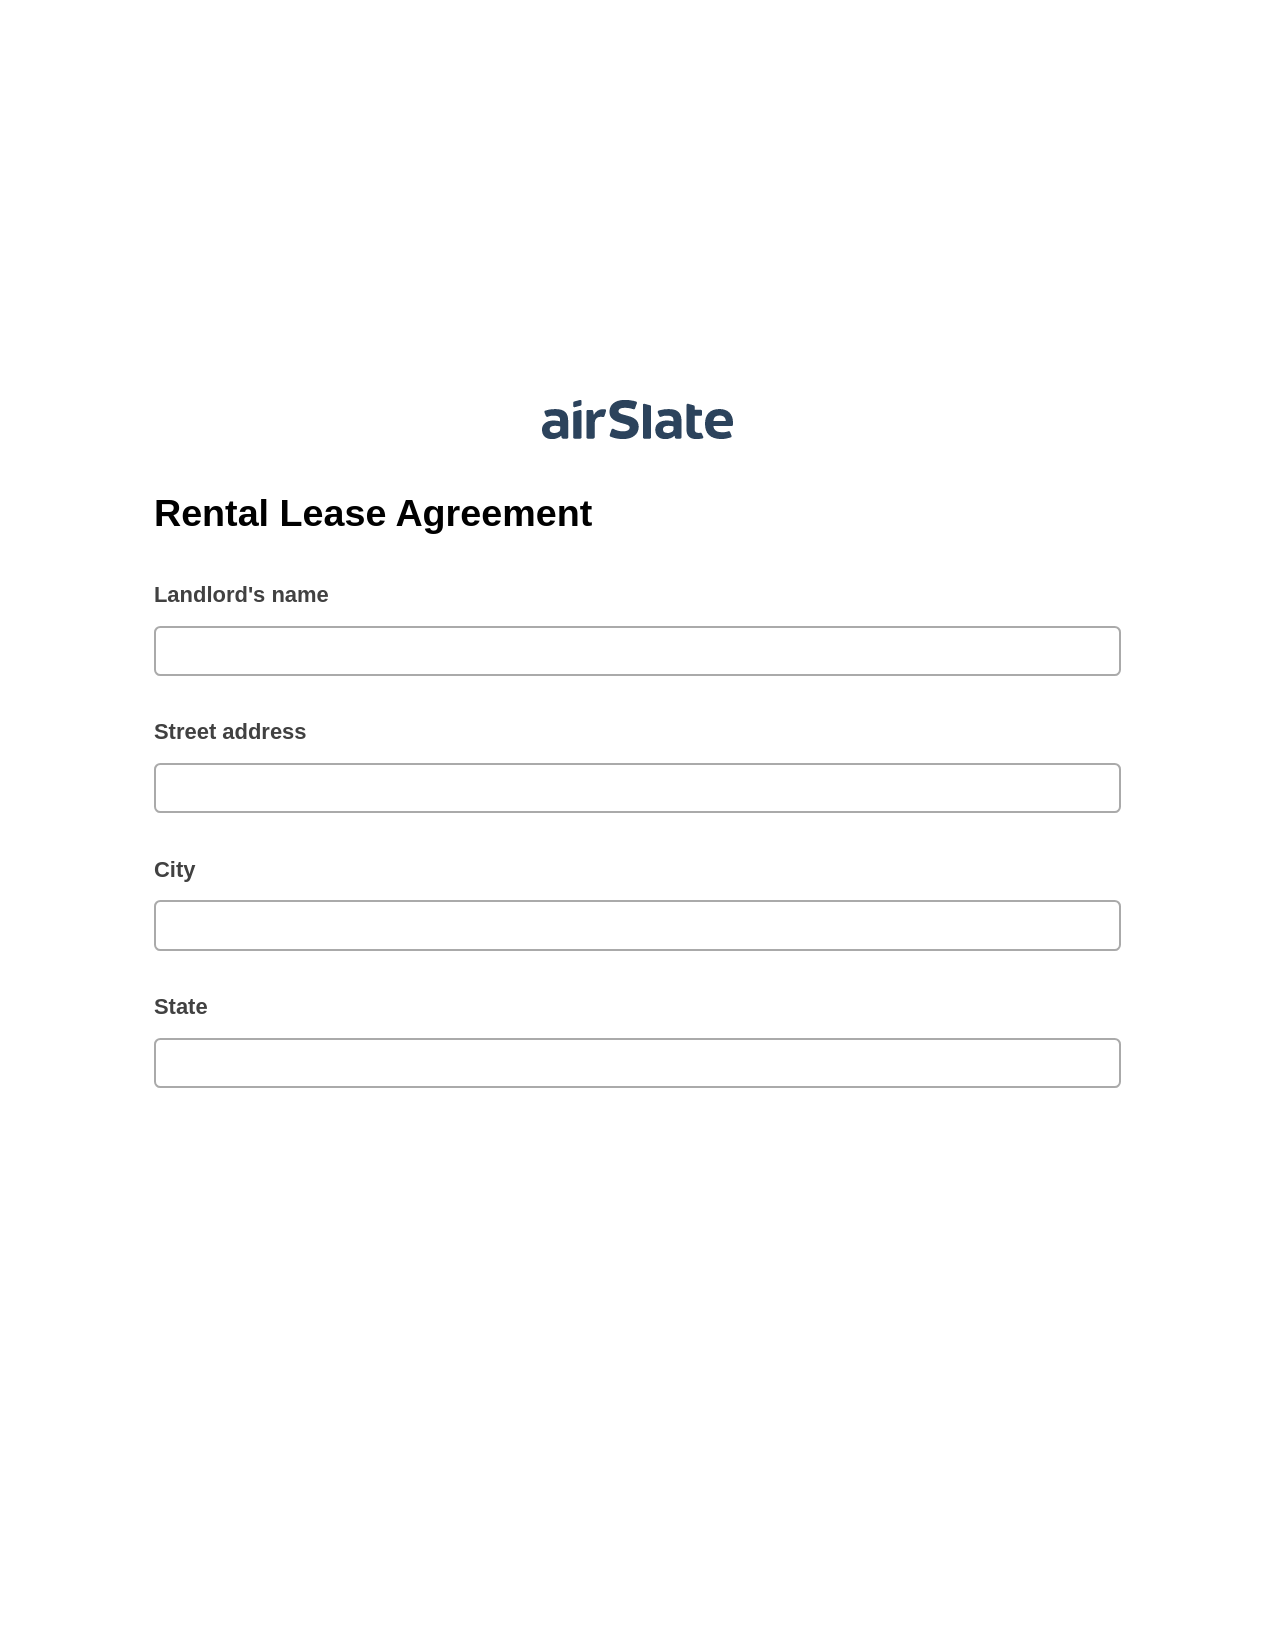 Multirole Rental Lease Agreement Pre-fill from CSV File Dropdown Options Bot, Create NetSuite Records Bot, Slack Two-Way Binding Bot